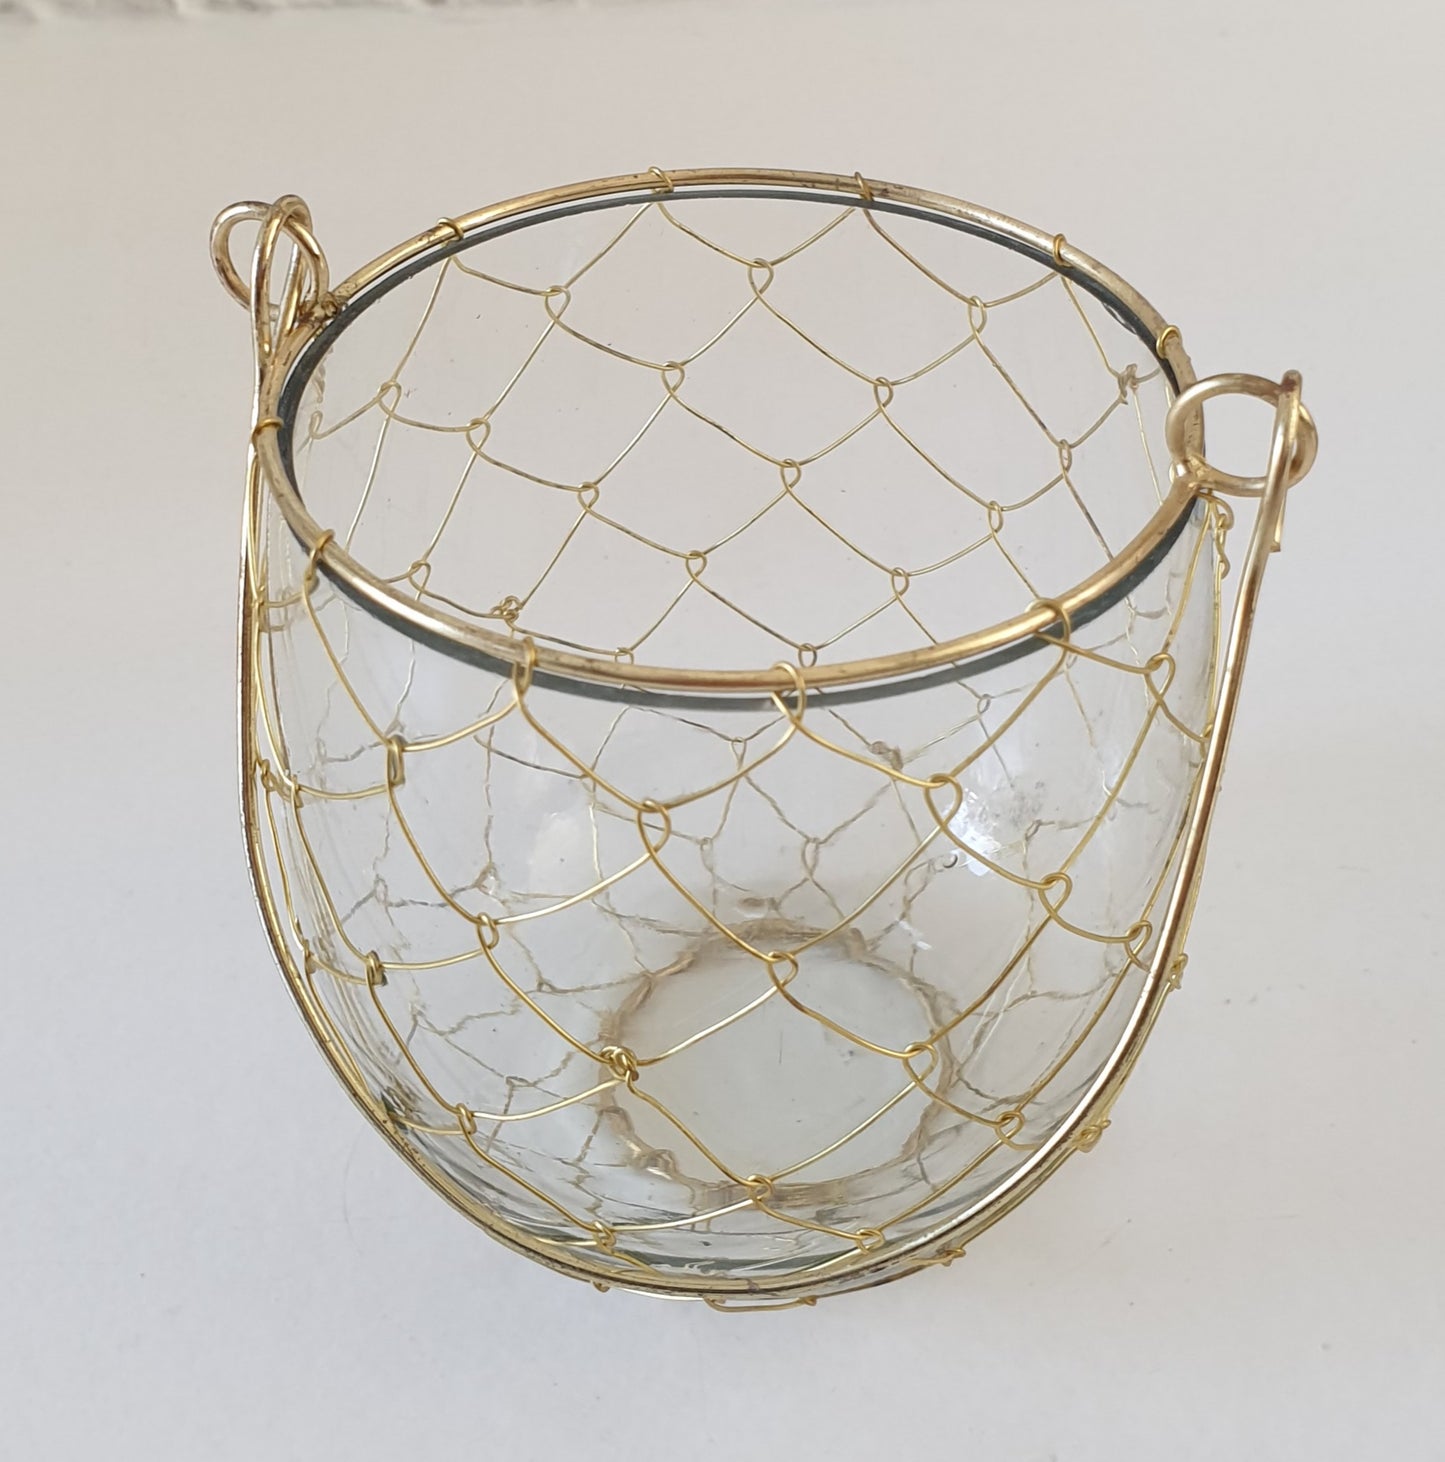 Hanging vase/wind-light with gold thread